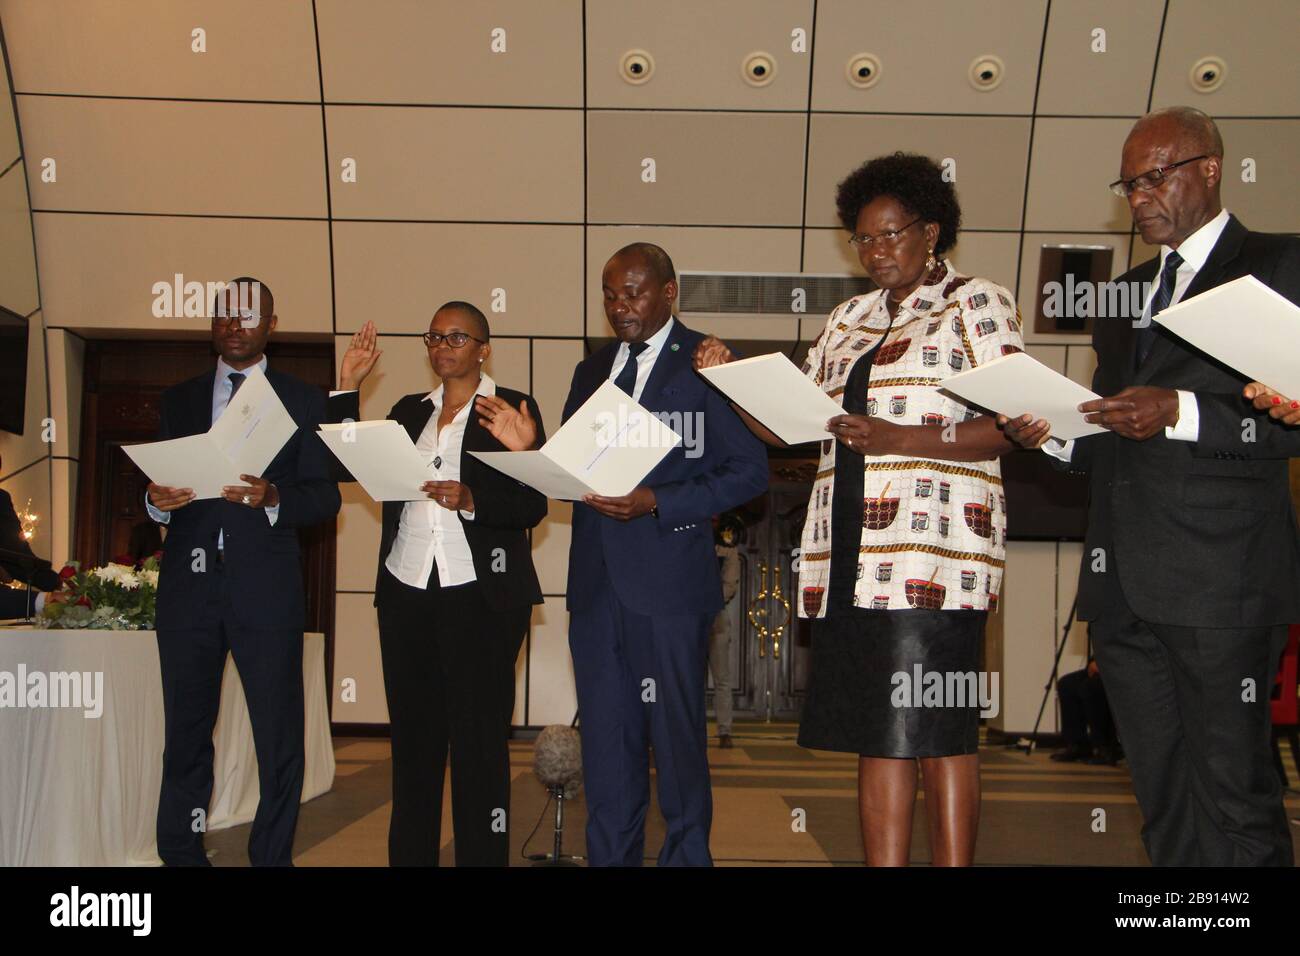 (200323) -- WINDHOEK, March 23, 2020 (Xinhua) -- Namibia's newly appointed ministers and deputy ministers take their oath of office at State House in Windhoek, Nambia, March 23, 2020. Namibian President Hage Geingob on Sunday appointed eight members of parliament and unveiled his new cabinet, local media reported citing a statement from the presidency. (Xinhua/Jacobina Mouton) Stock Photo